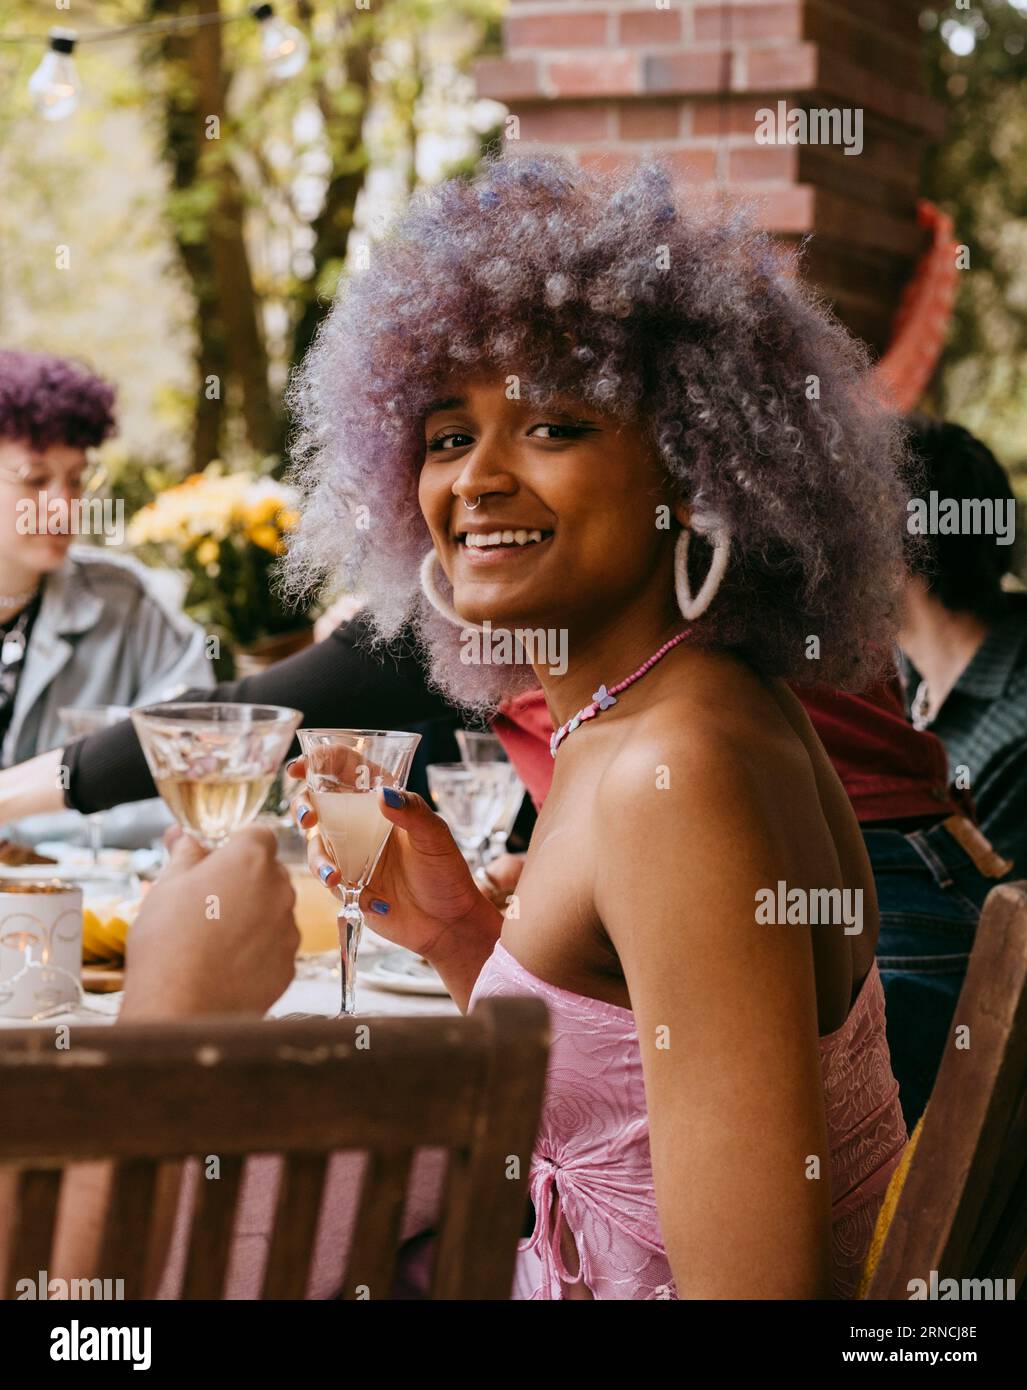 Side view portrait of smiling transwoman with curly hair sitting with friends during party in back yard Stock Photo